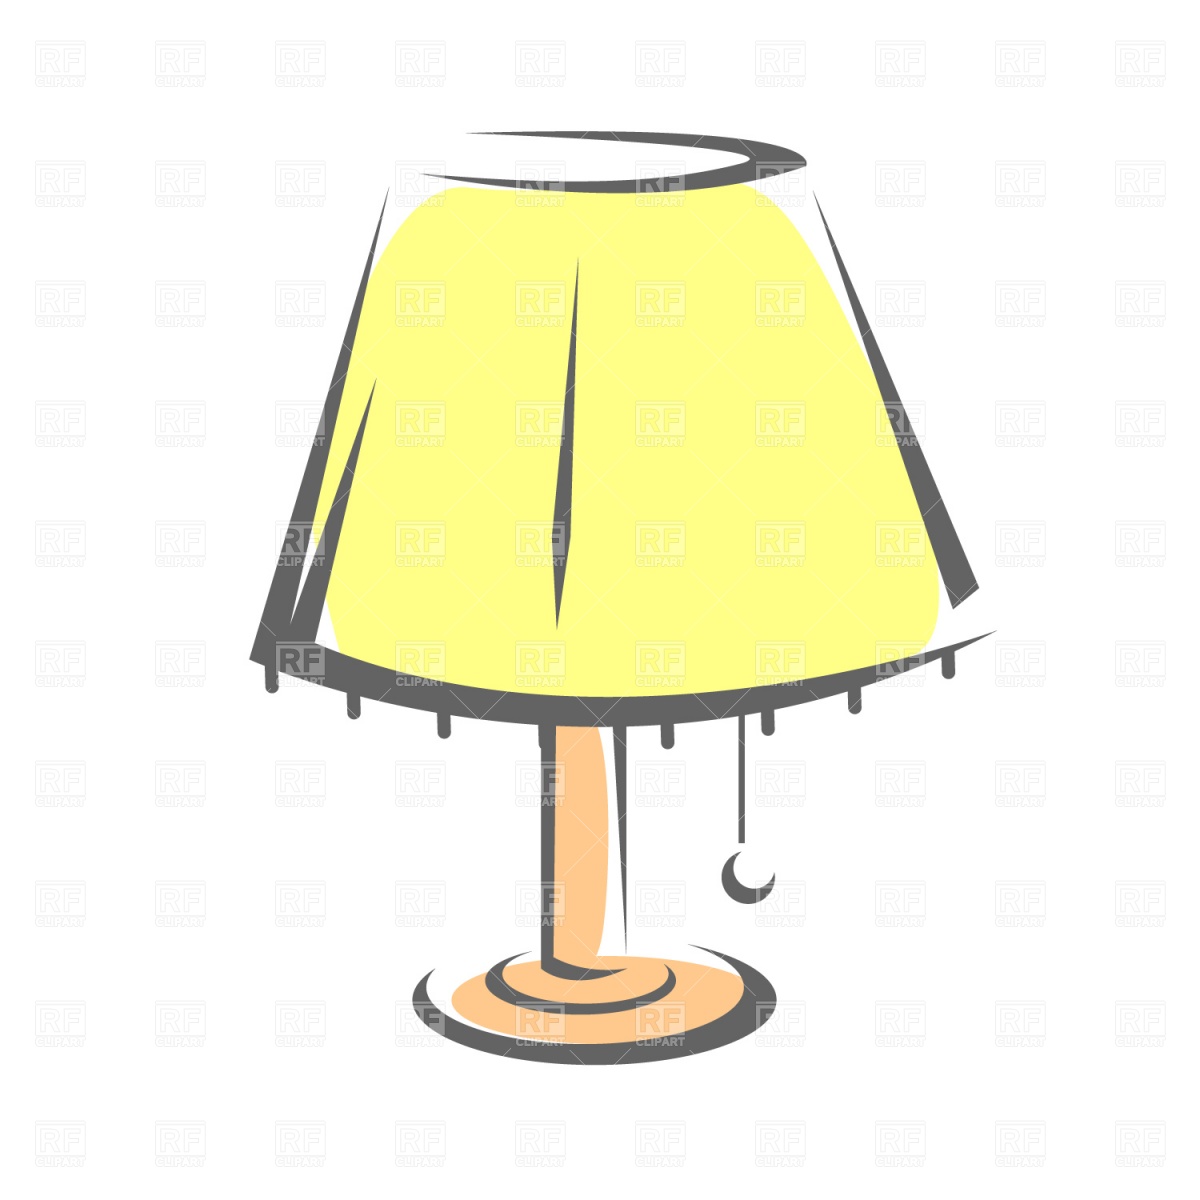 Table retro electric lamp wit